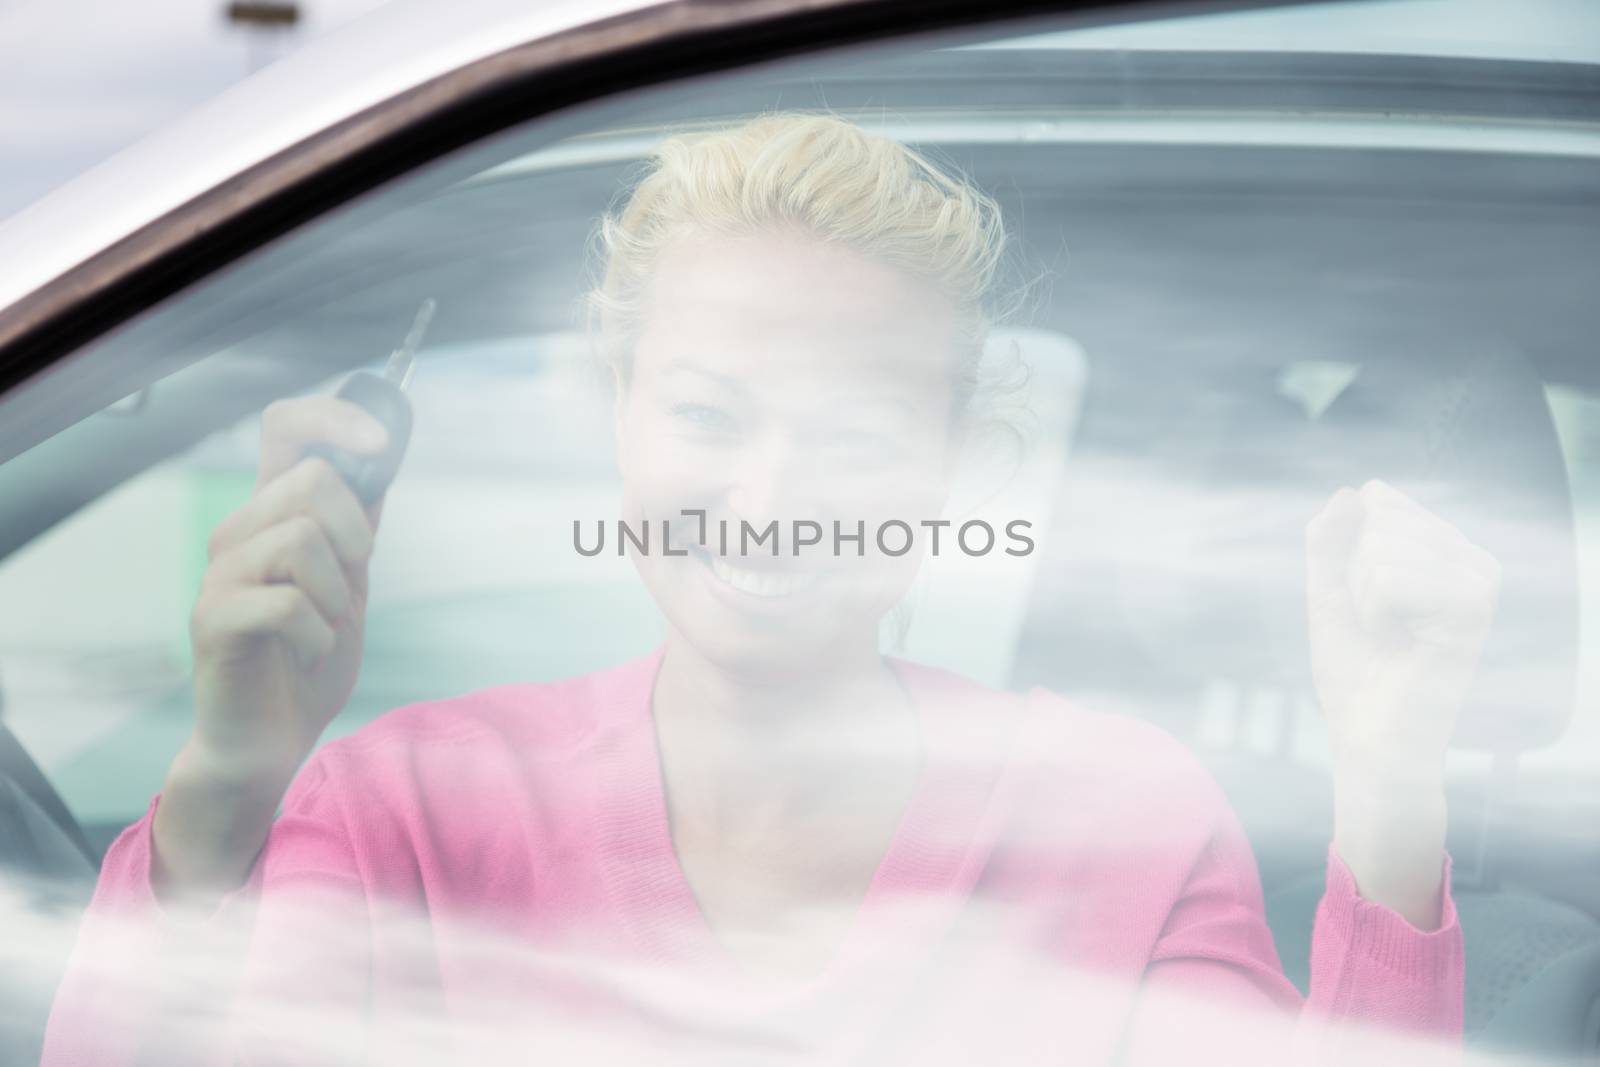 Woman driver showing car keys. by kasto